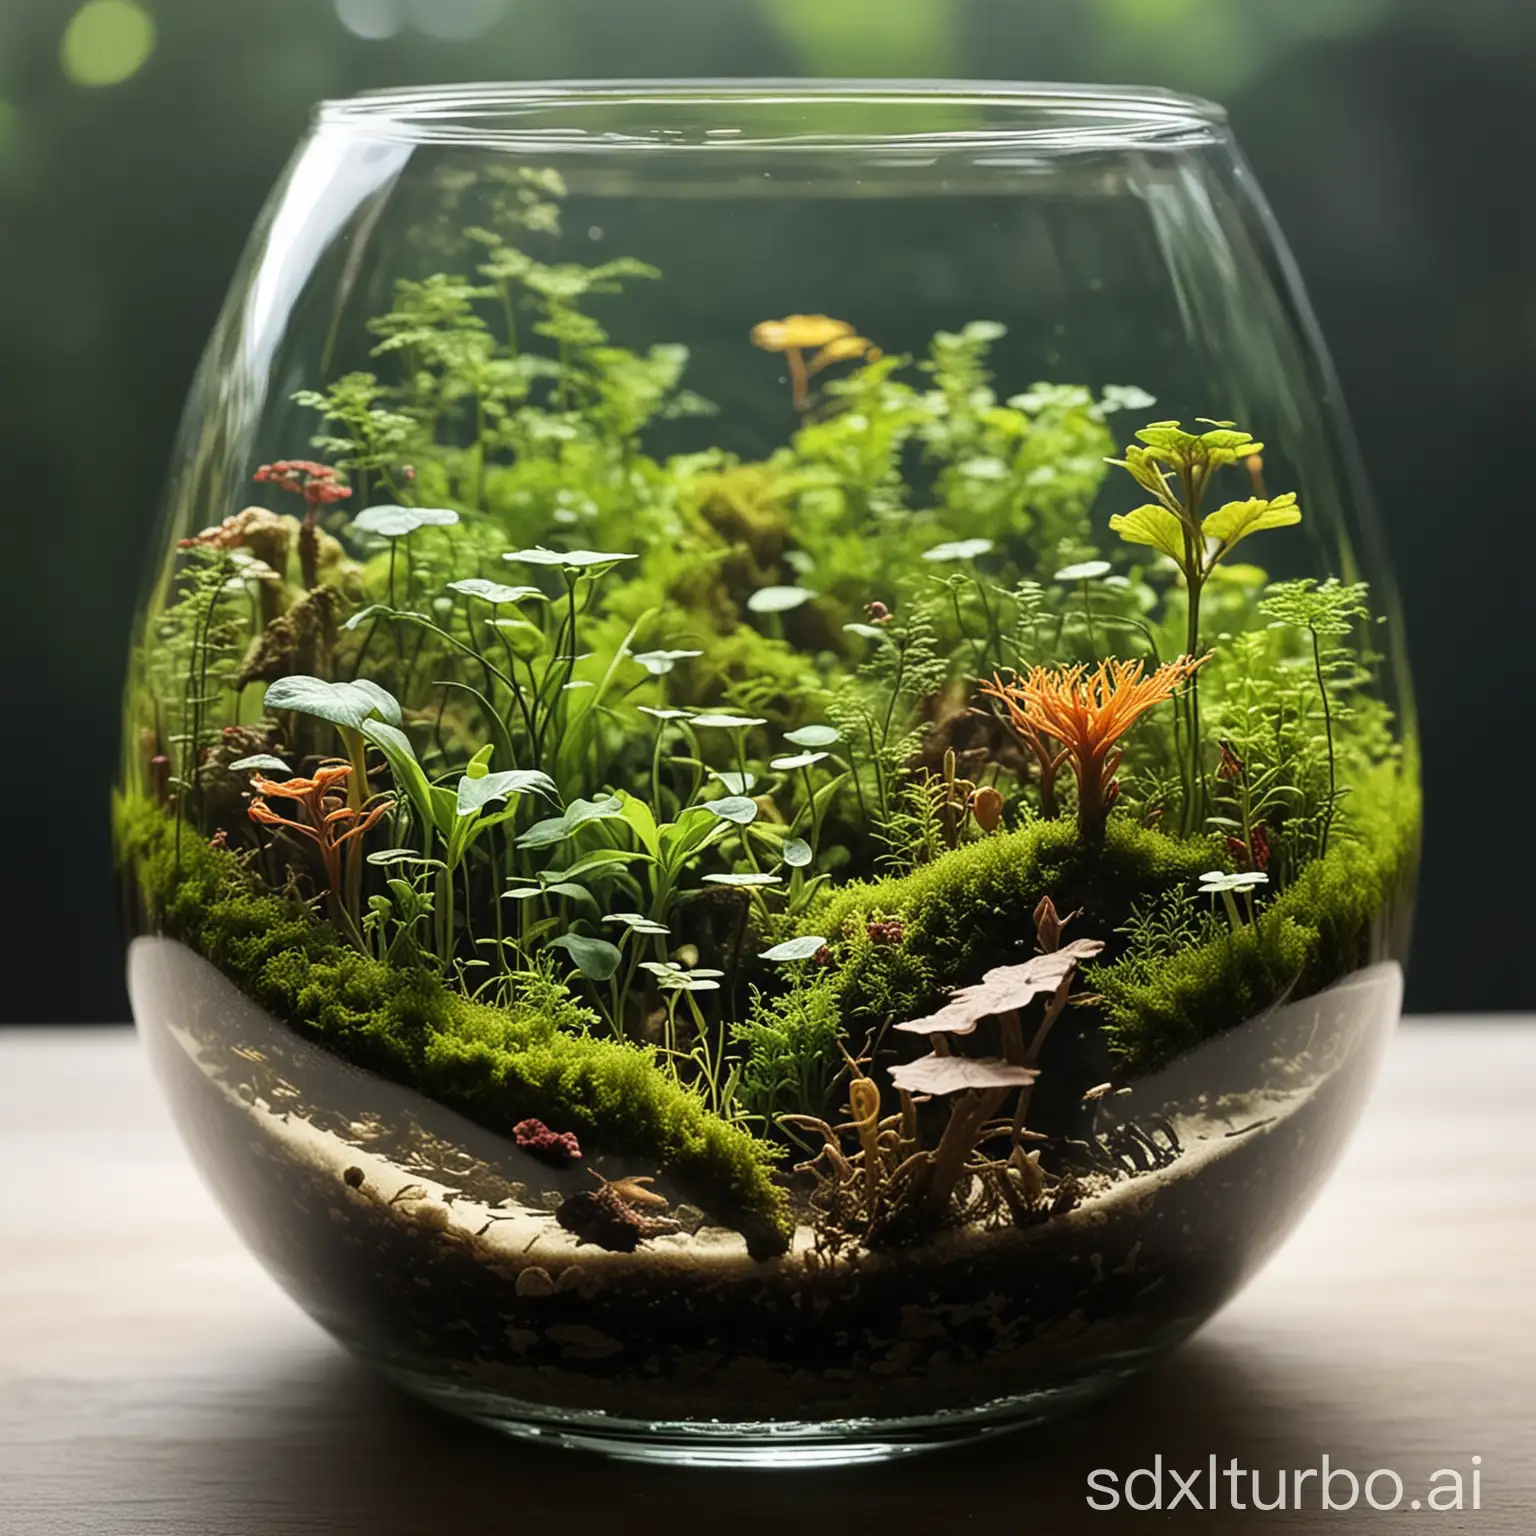 ecosystem in a glass